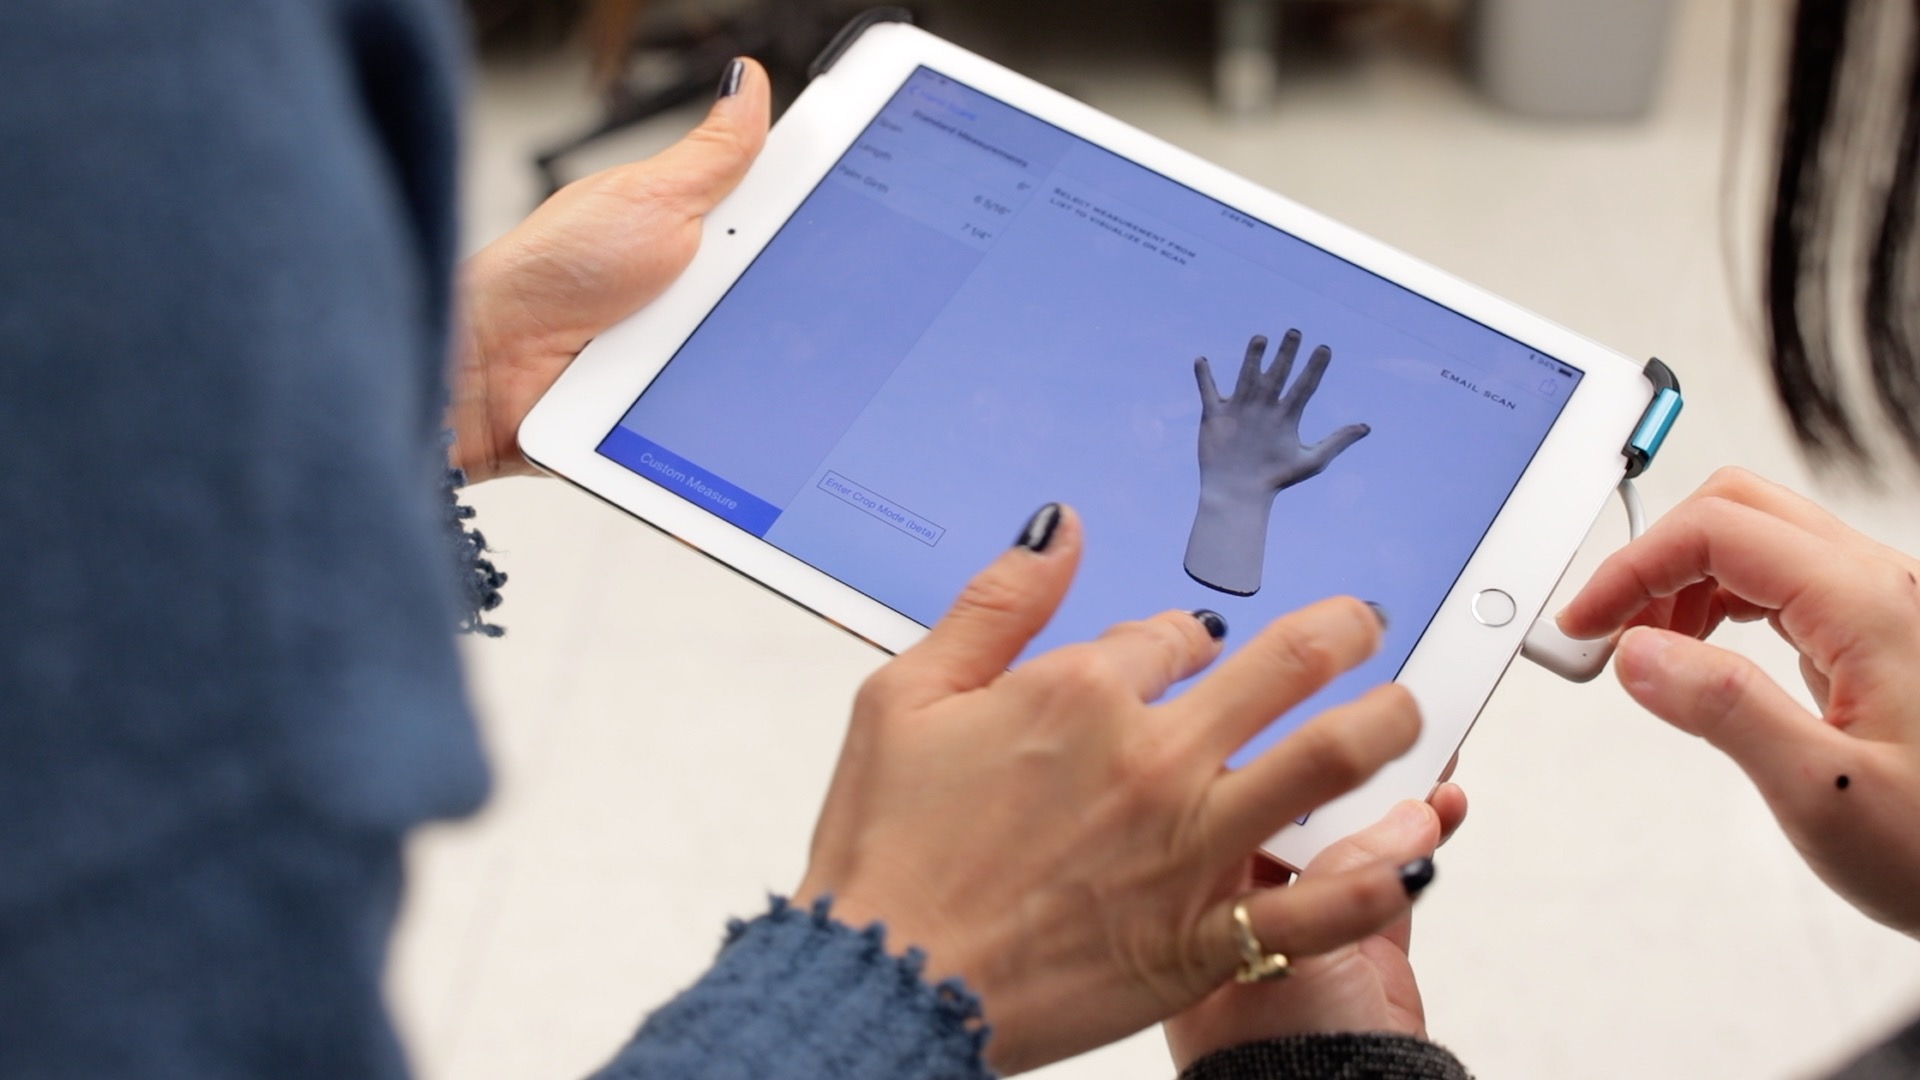 Close up of hands holding an iPad displaying research